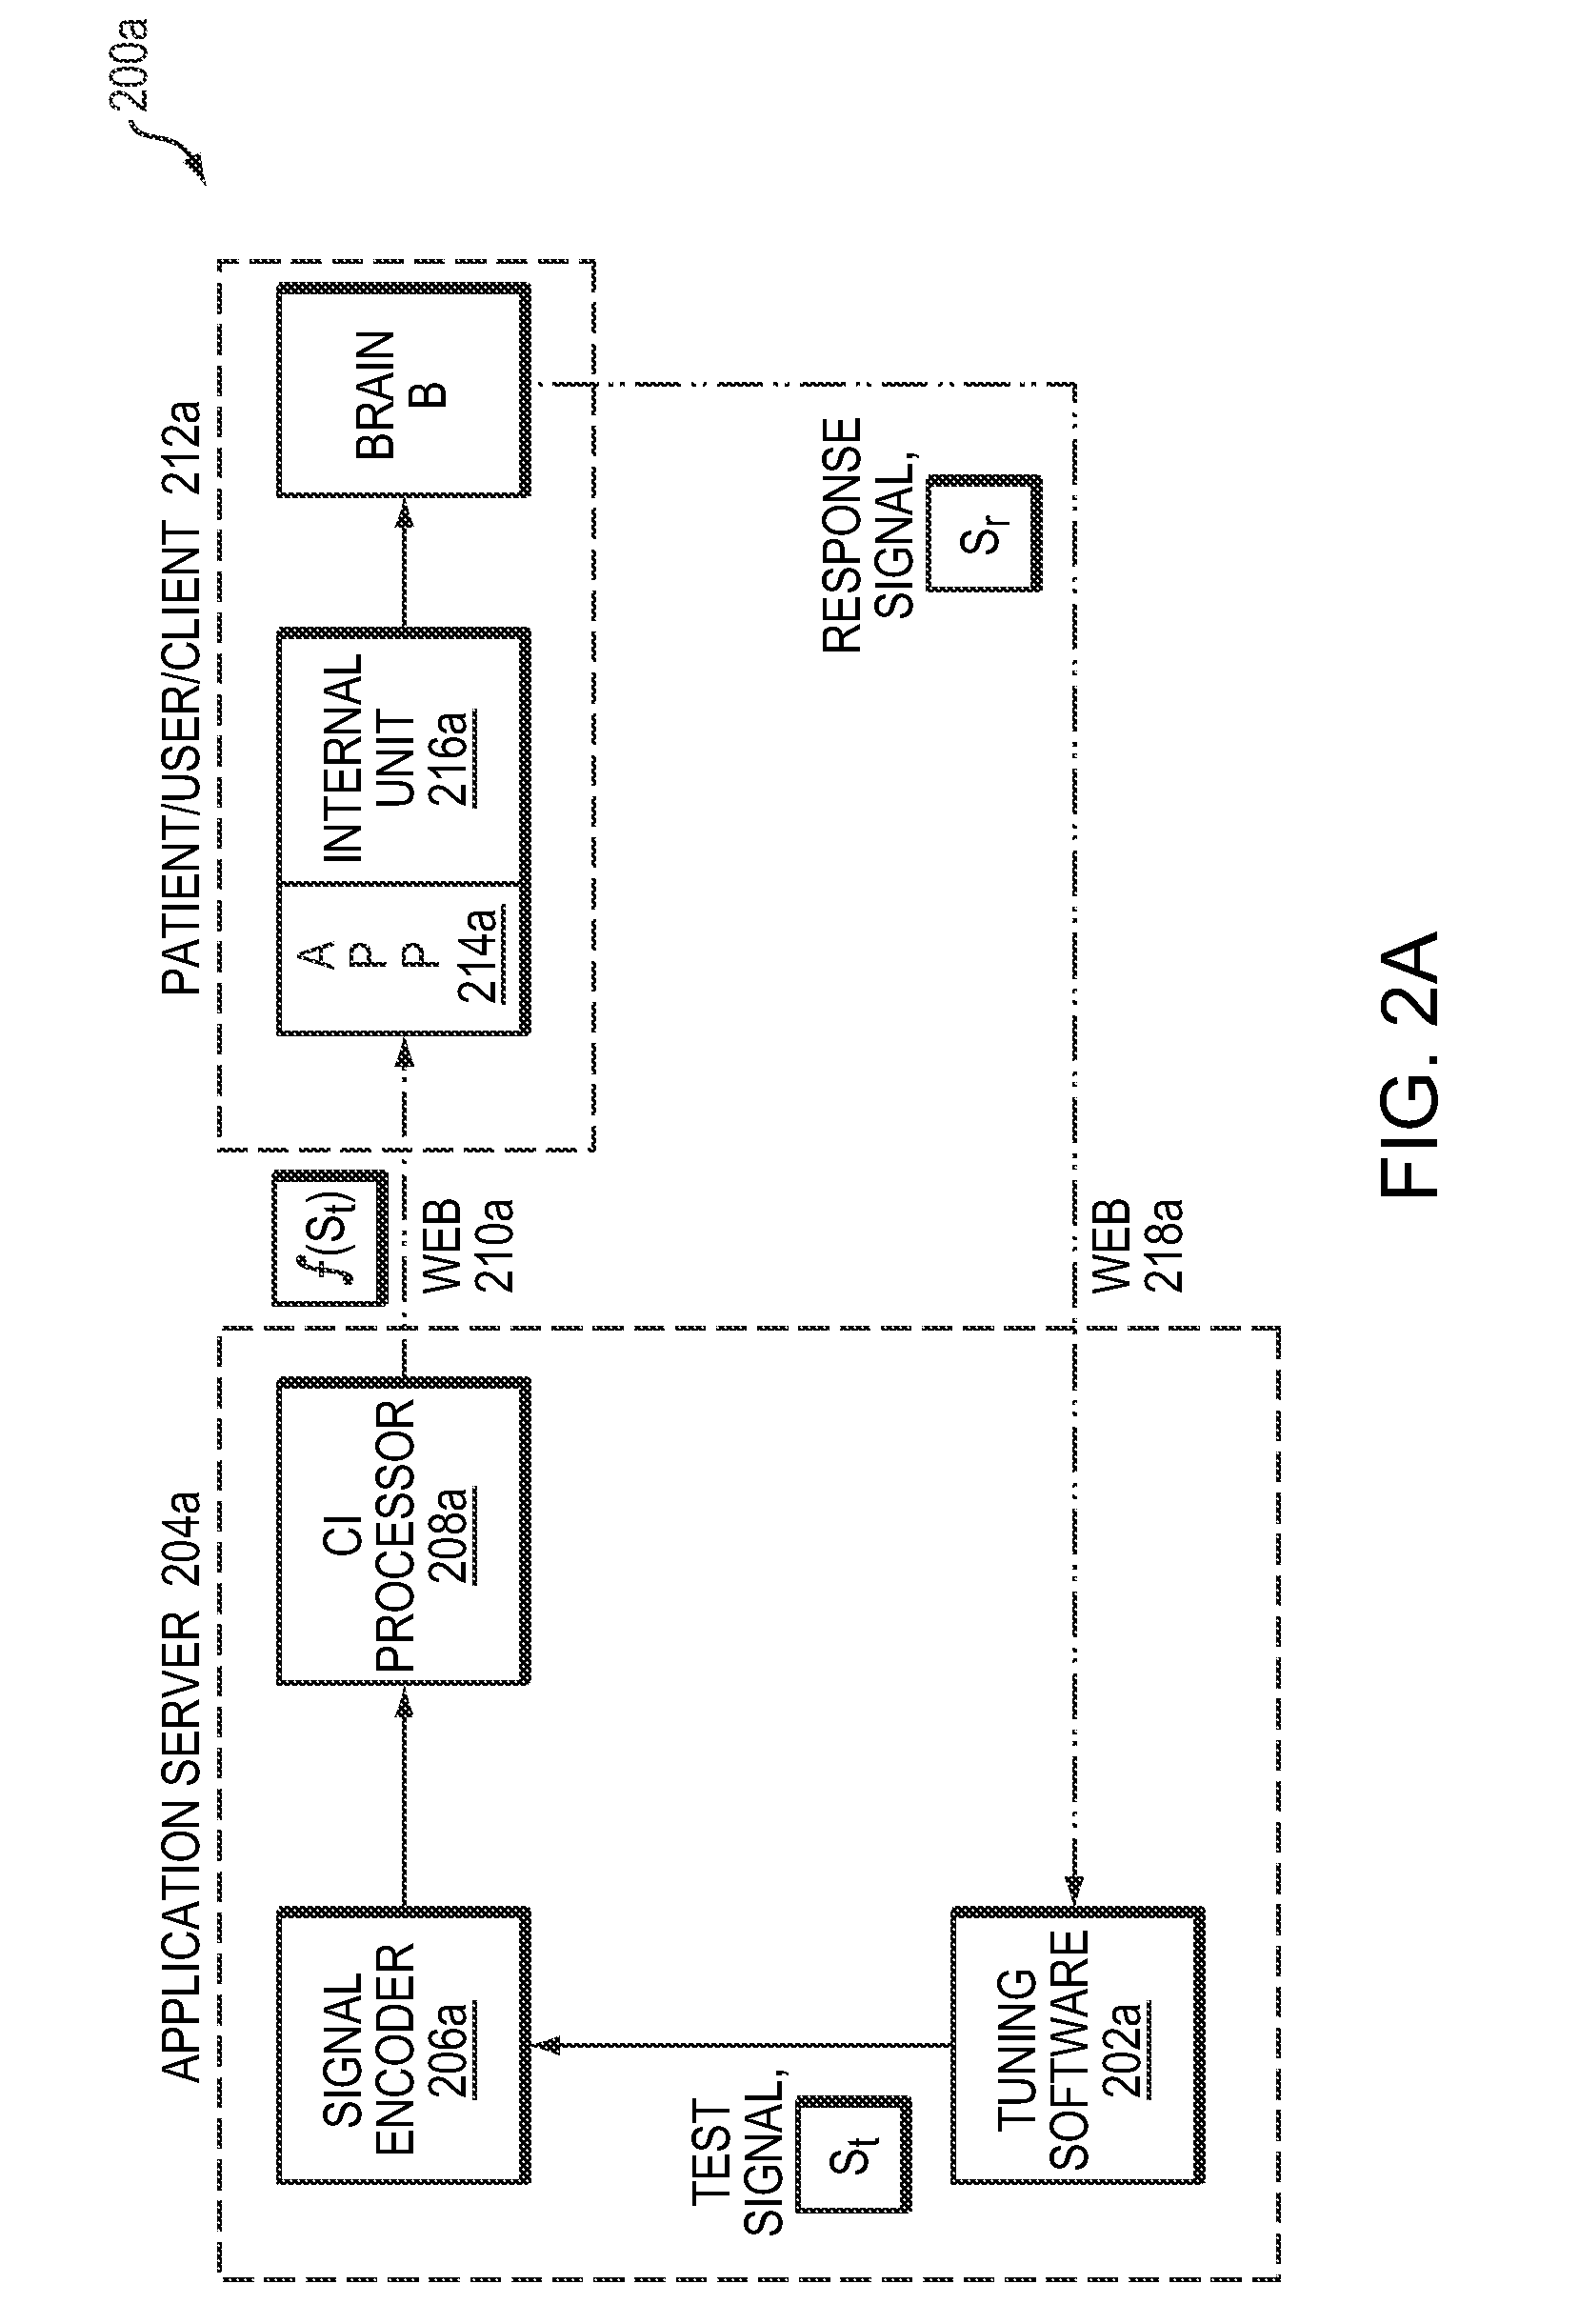 Systems and methods for remotely tuning hearing devices